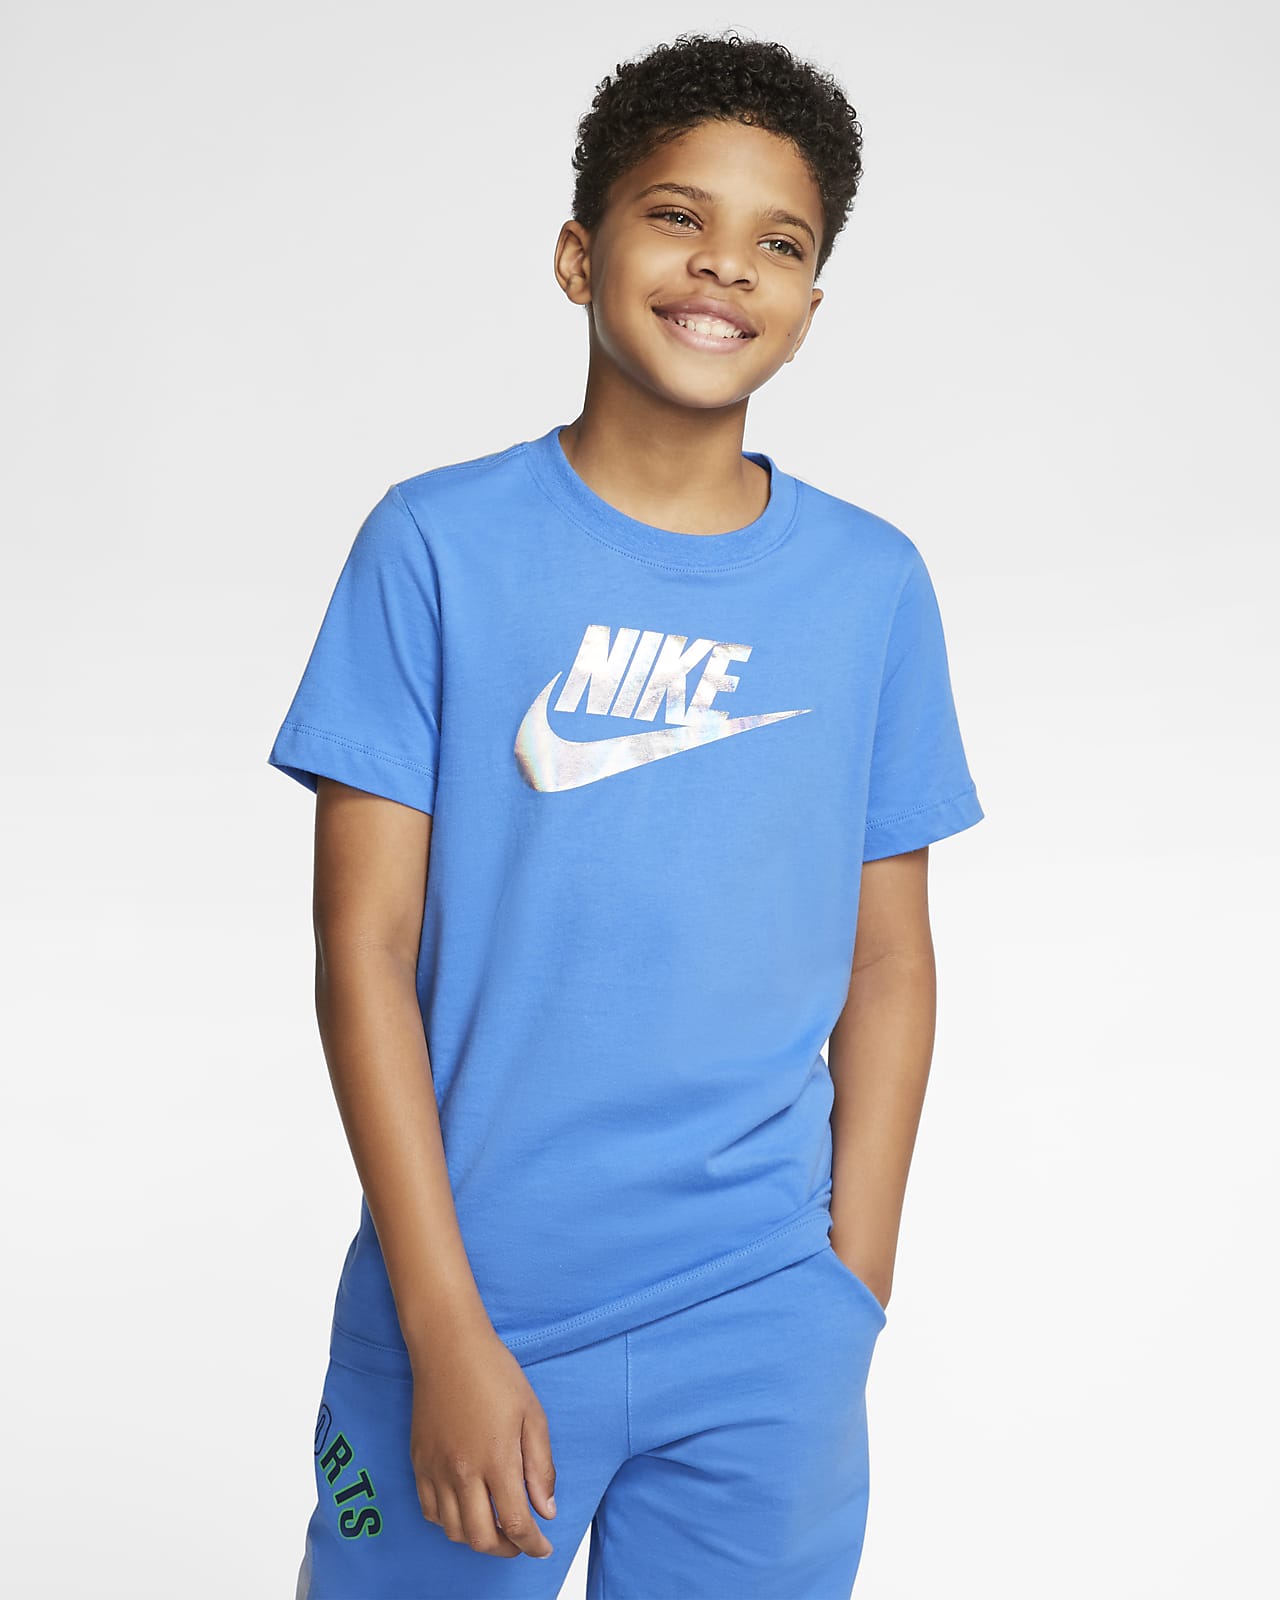 nike outfits for little boys